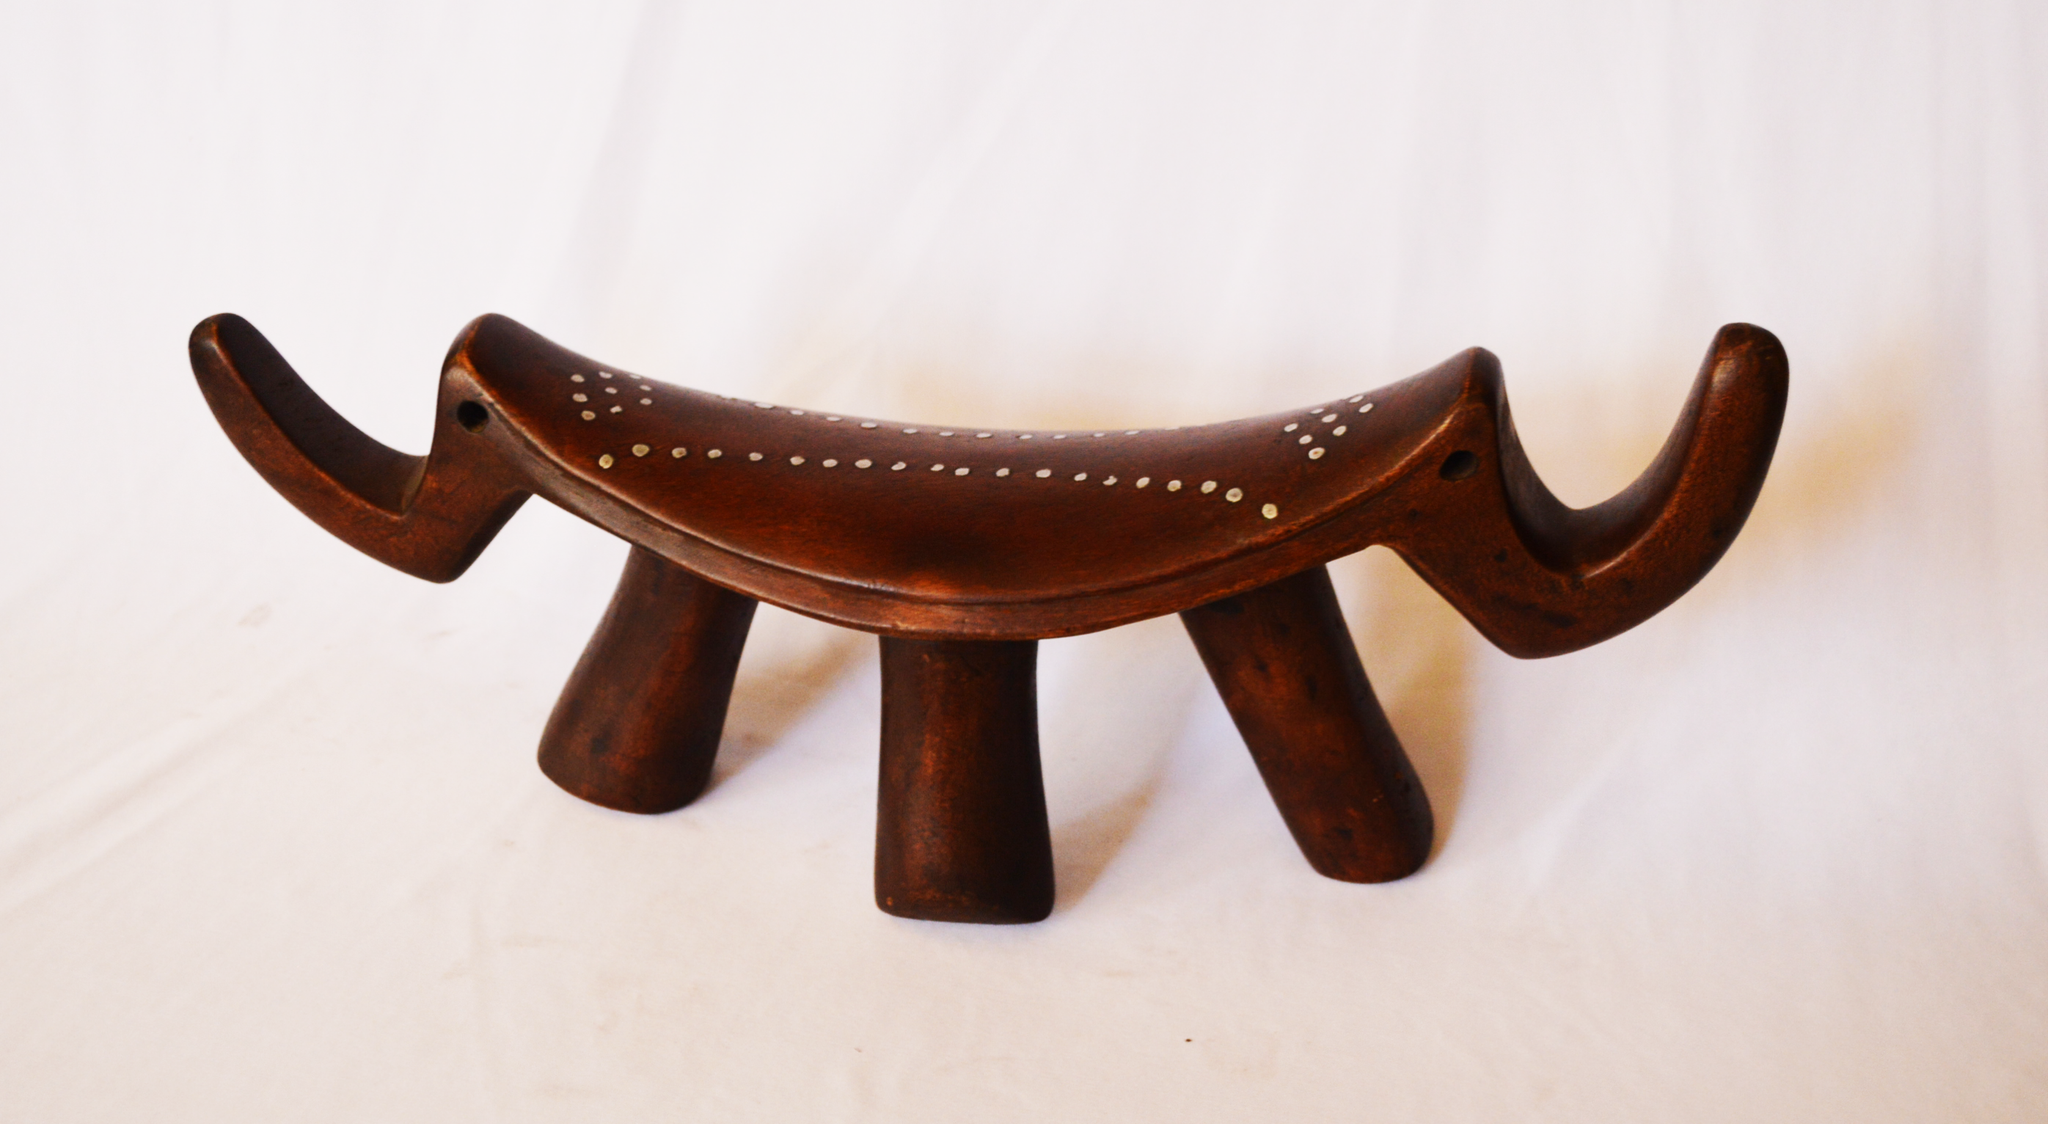 2 headed elephant headrest - Authentic African handicrafts | Clothing, bags, painting, toys & more - CULTURE HUB by Muthoni Unchained